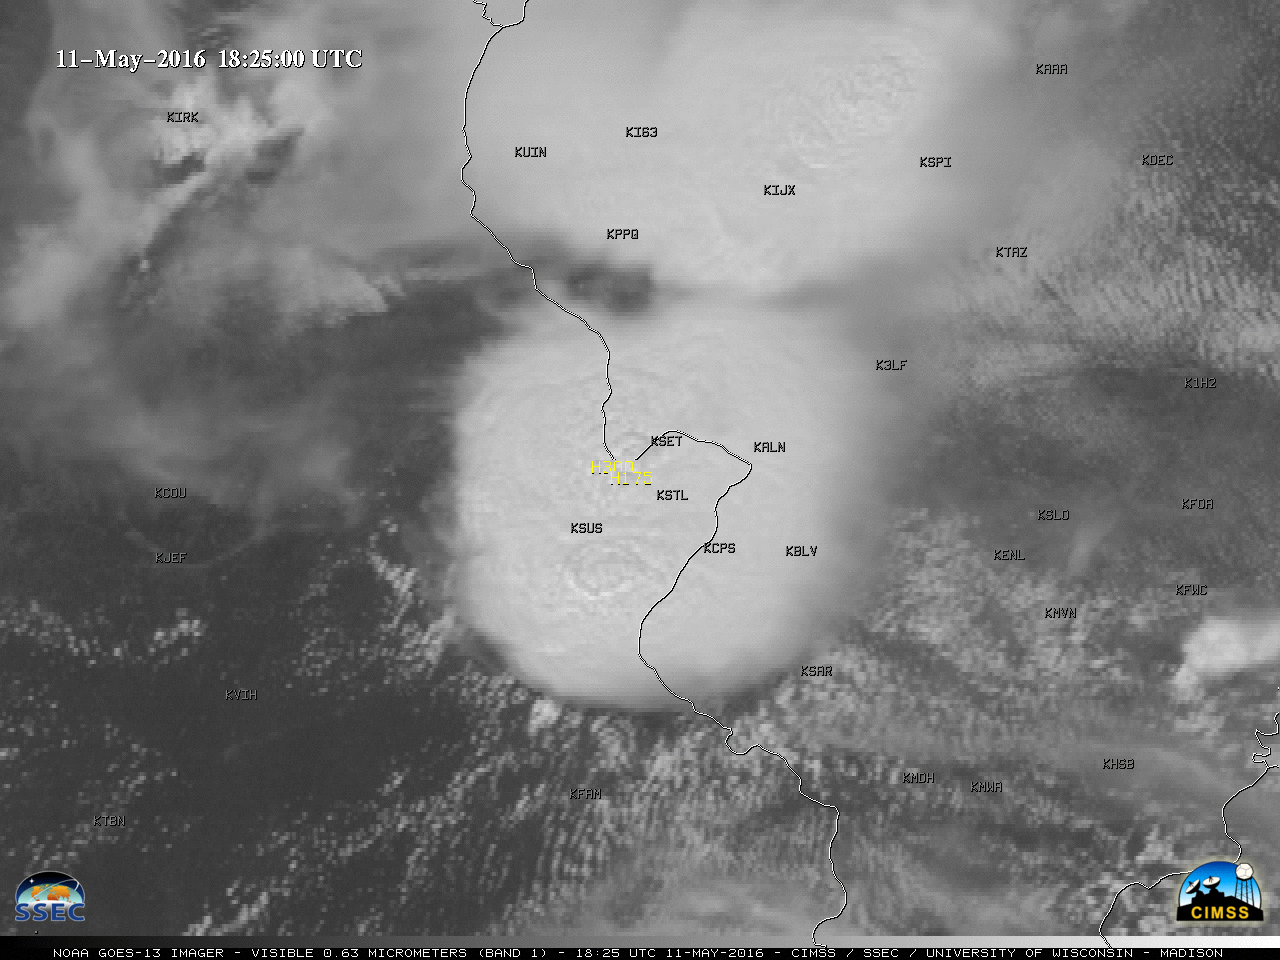 GOES-13 visible (0.63 µm) images, with parallax-corrected SPC storm reports [click to play animation]